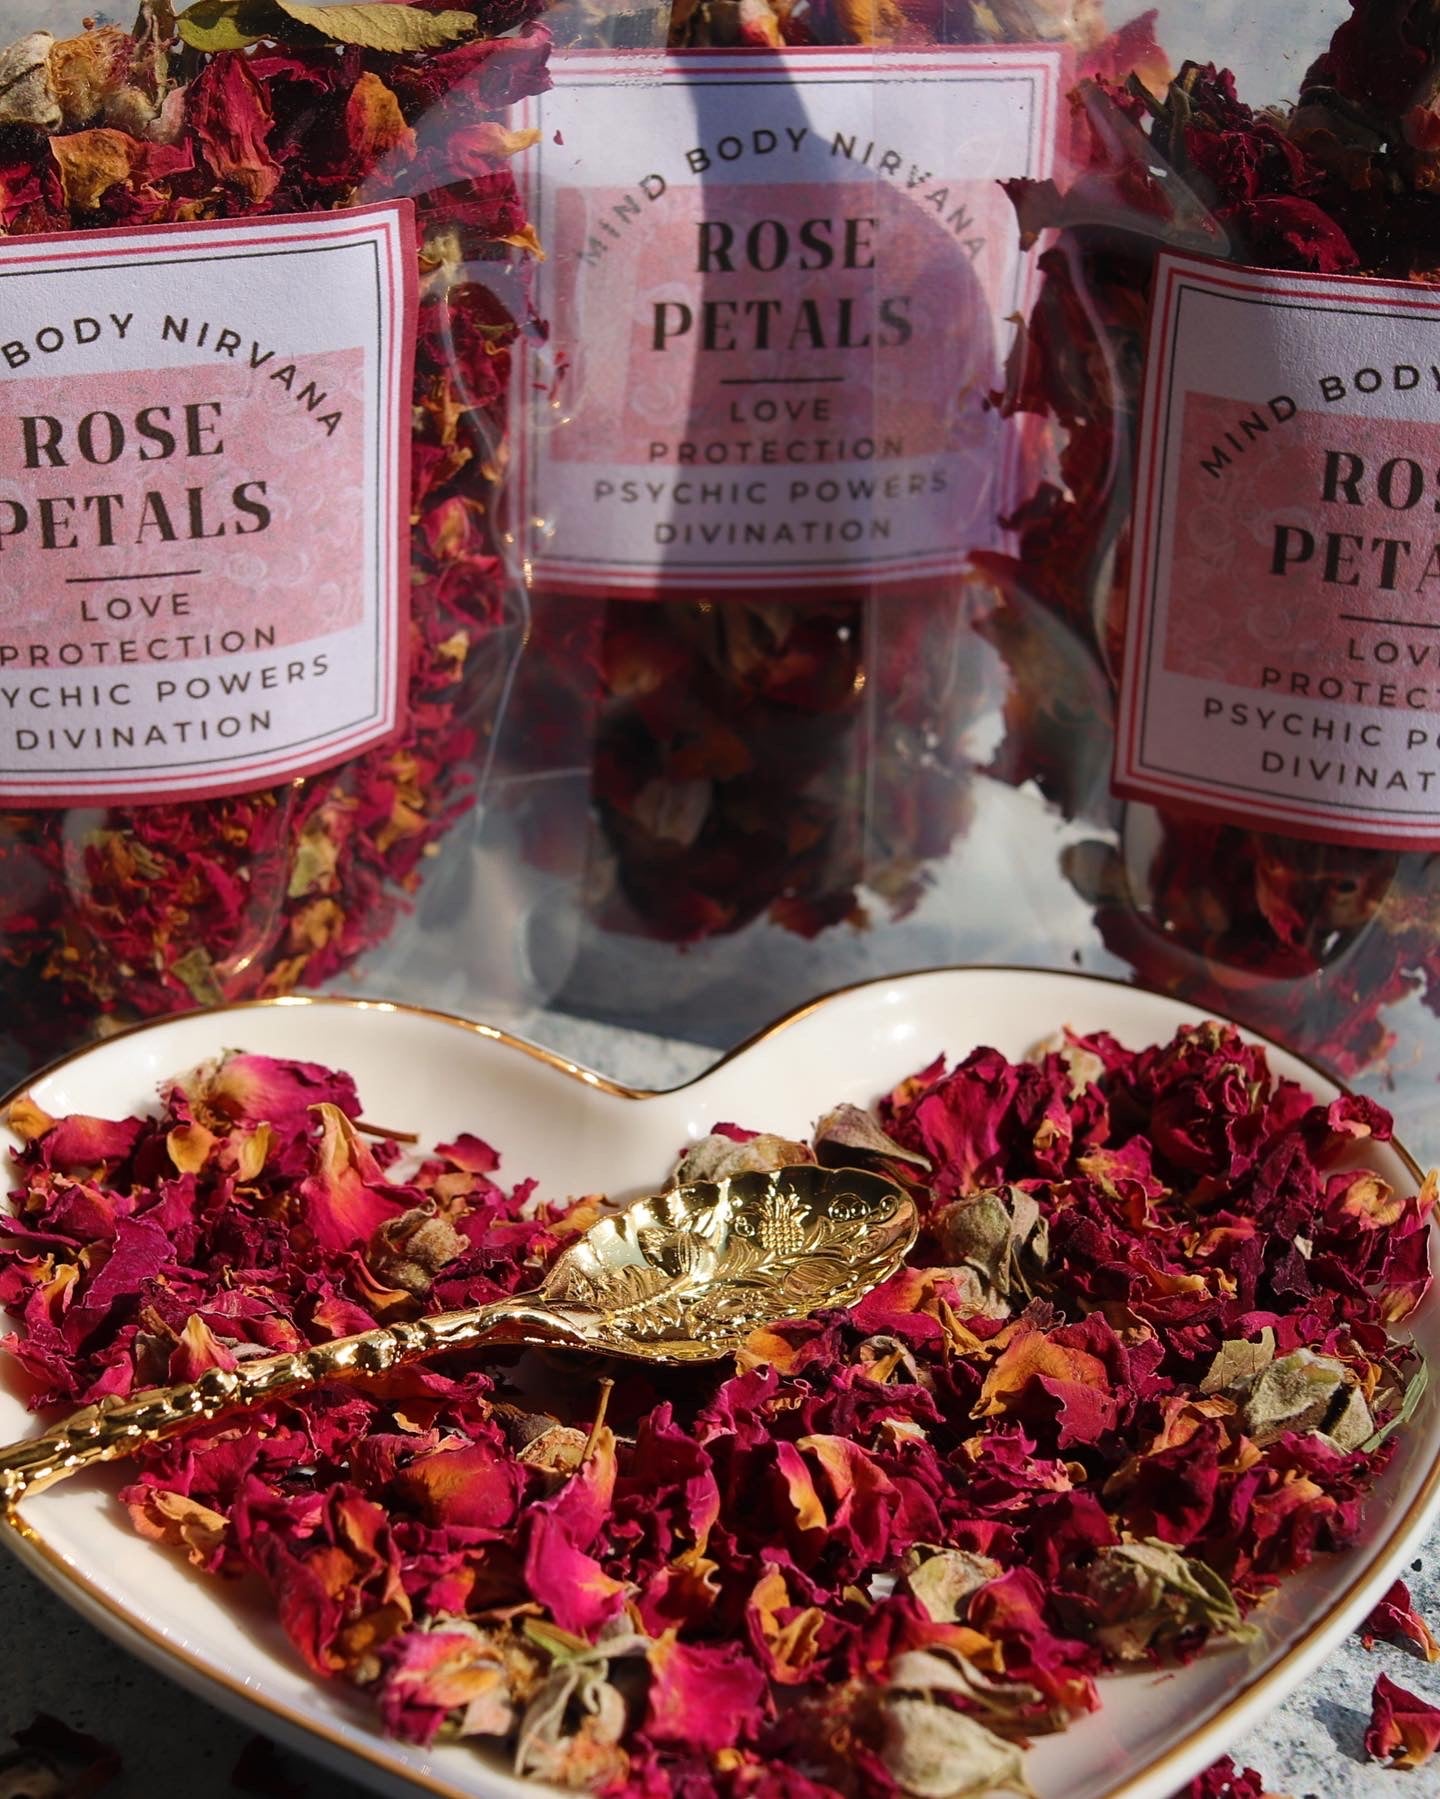 Dried Rose Buds and petals